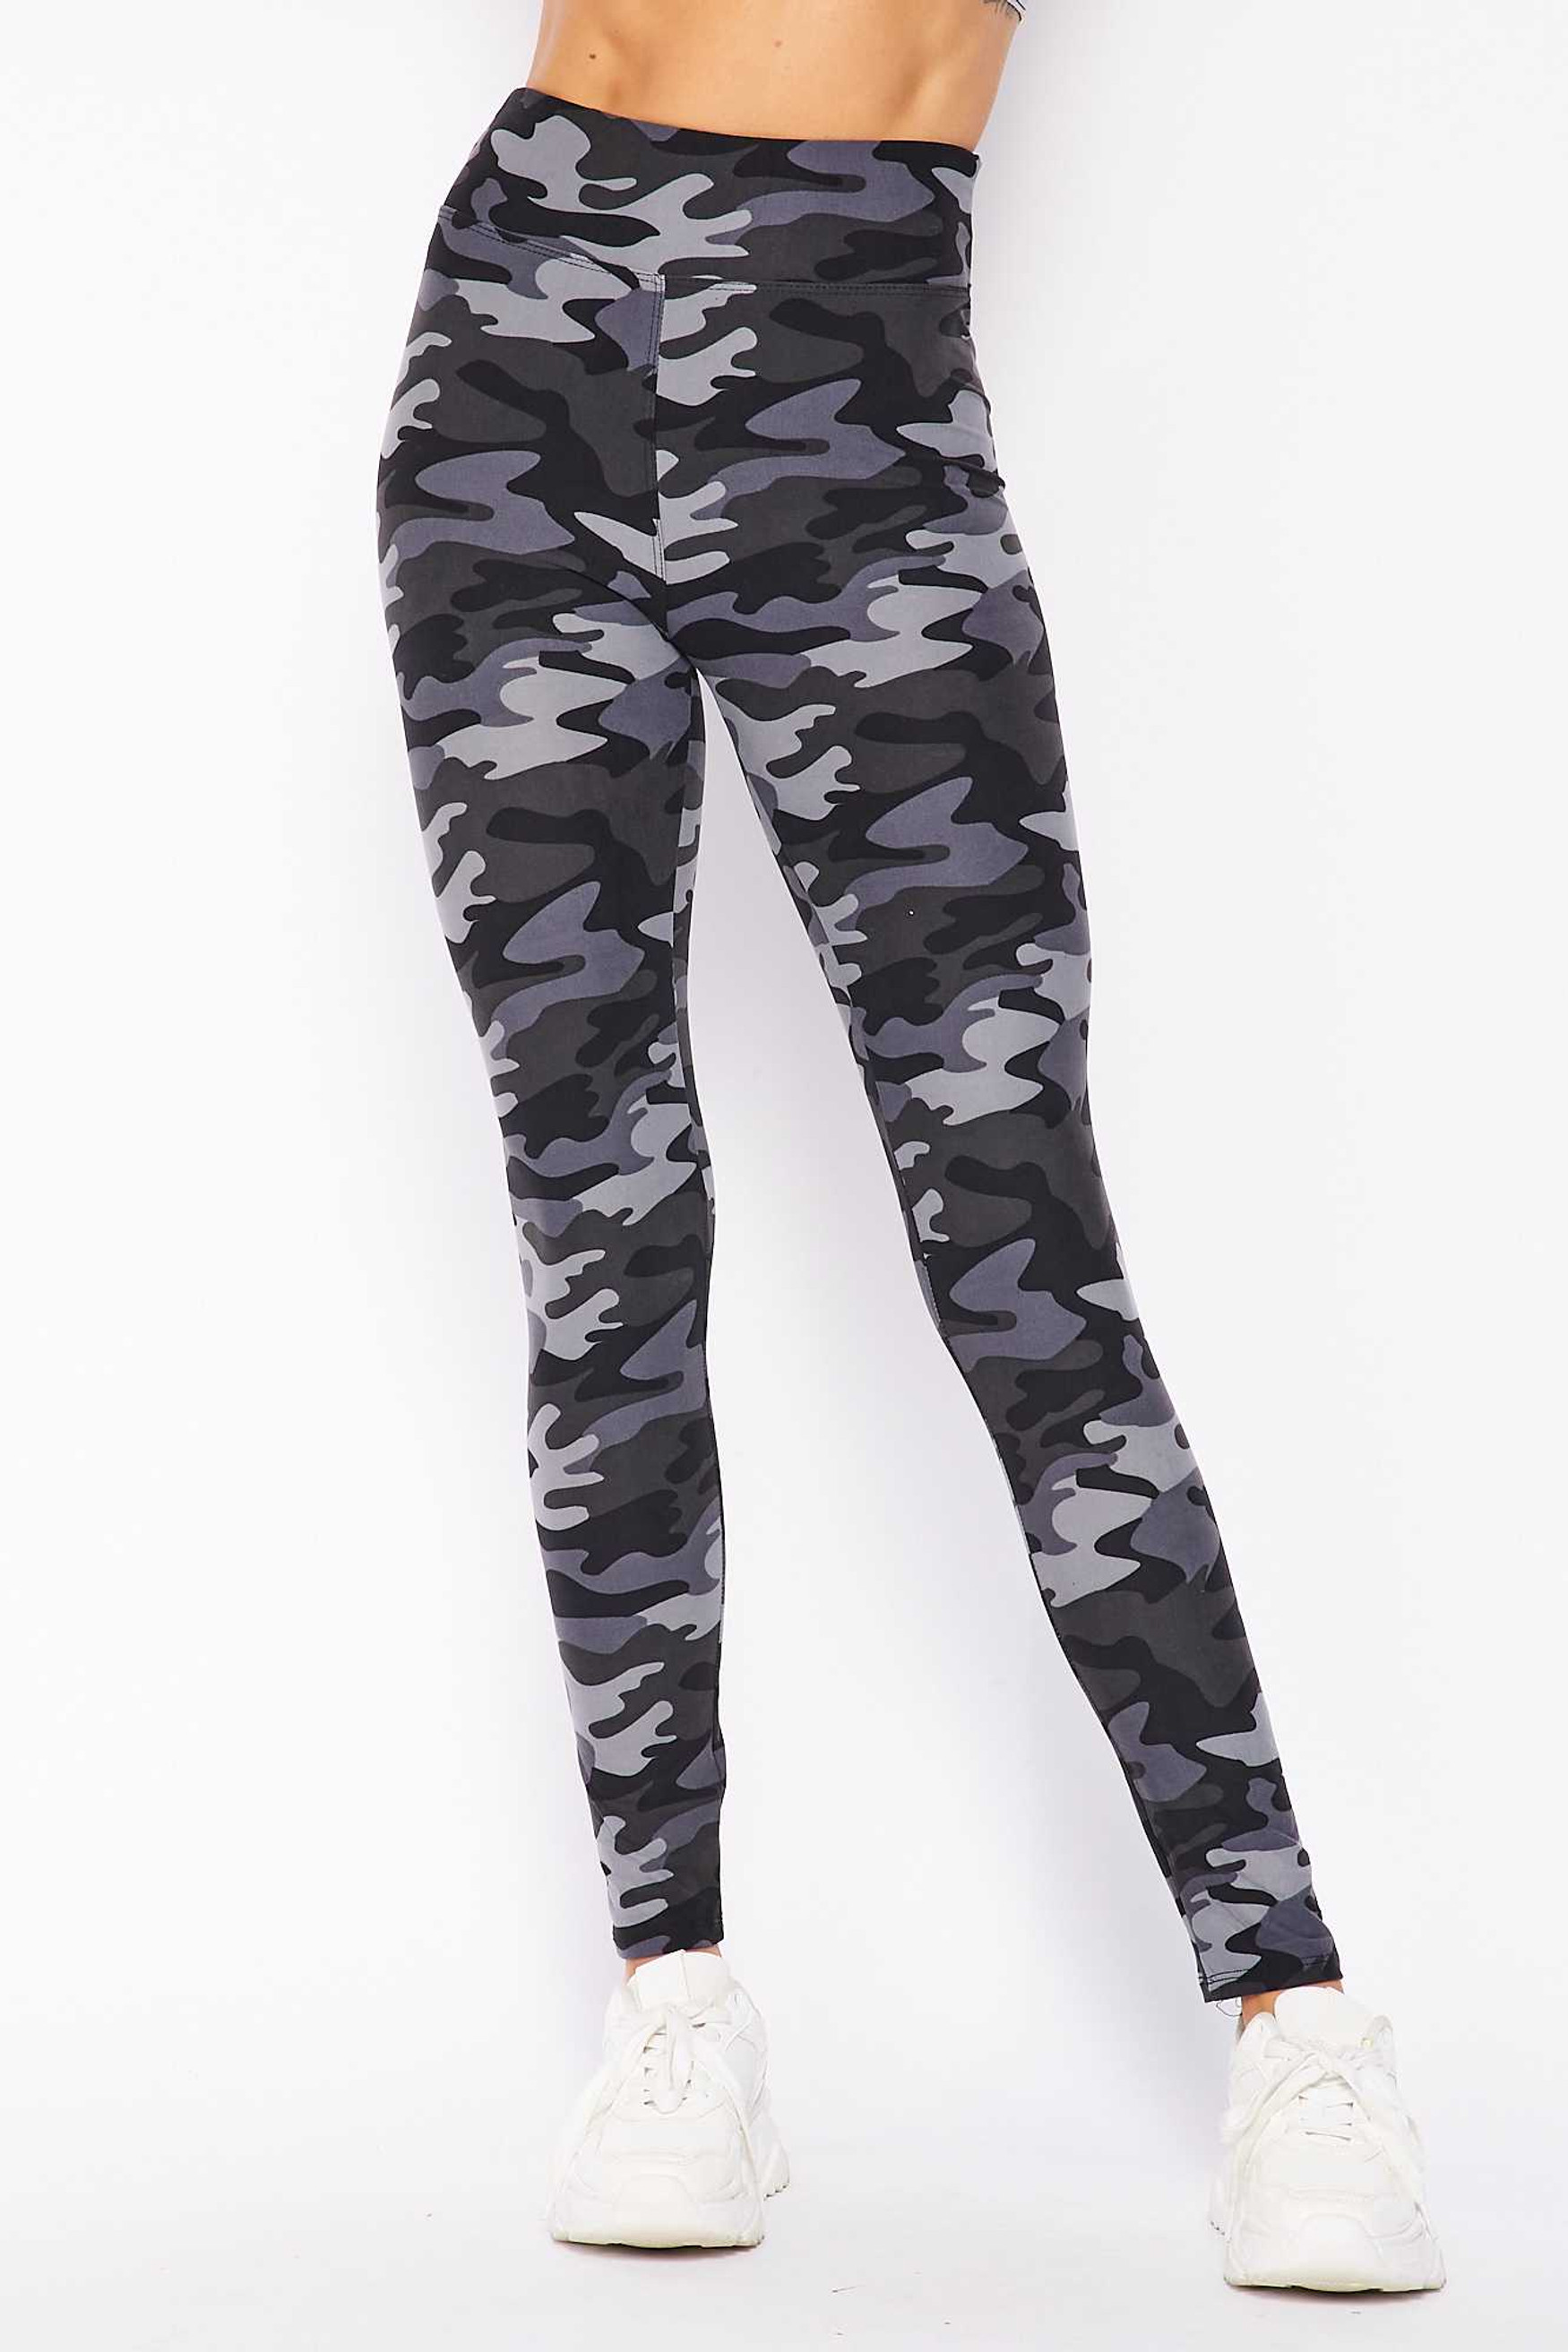 Buttery Soft Charcoal Camouflage High Waist Leggings